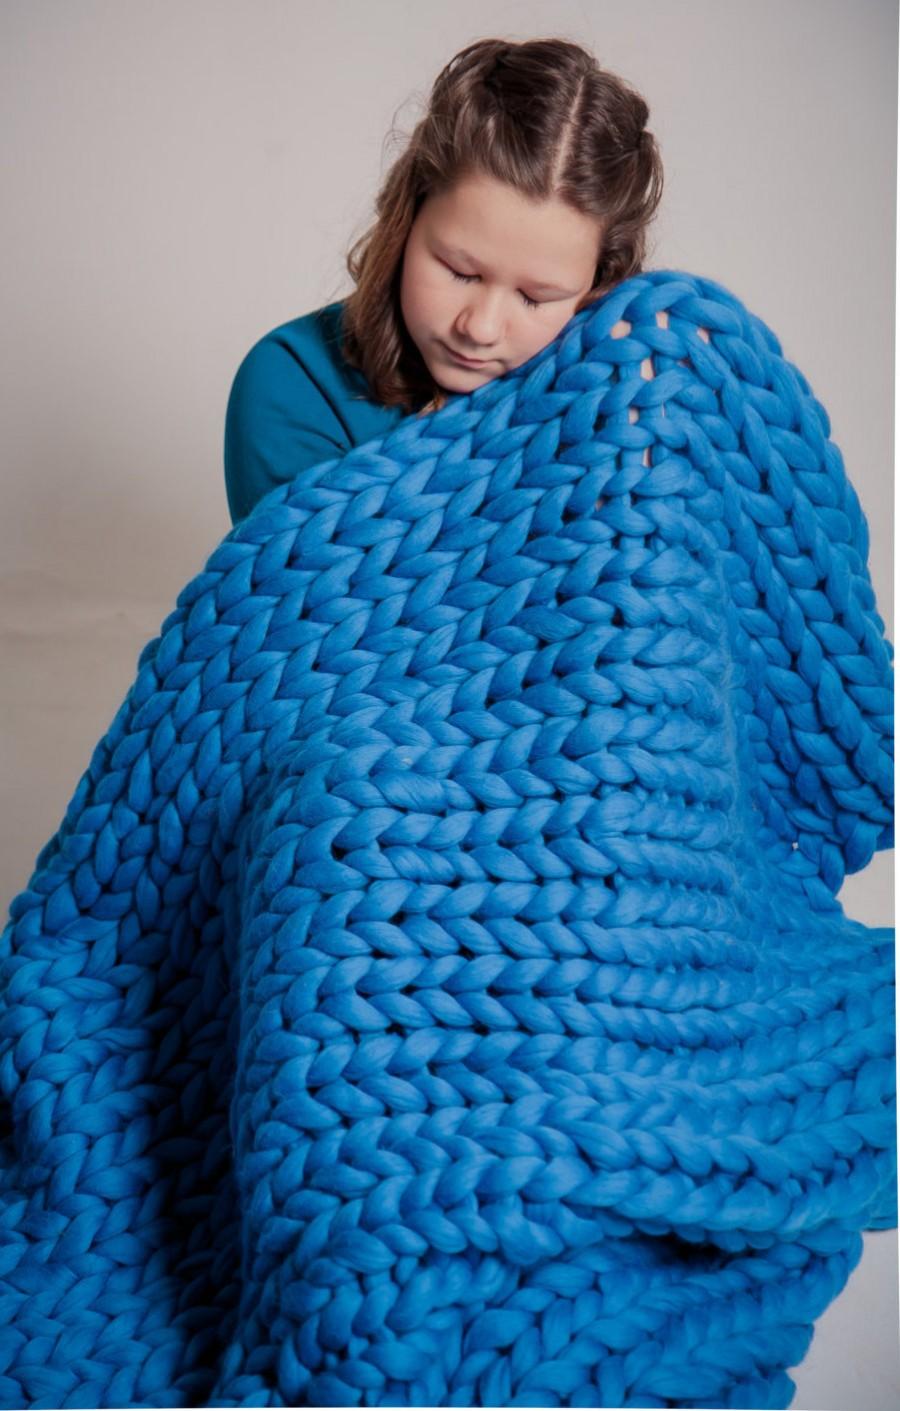 Hochzeit - Chunky blanket throw, Giant knitted afghan blanket, Pure Wool Giant Blanket, Bulky Knit Throw, Chunky Knitting, Lap blanket. Gift, Blue